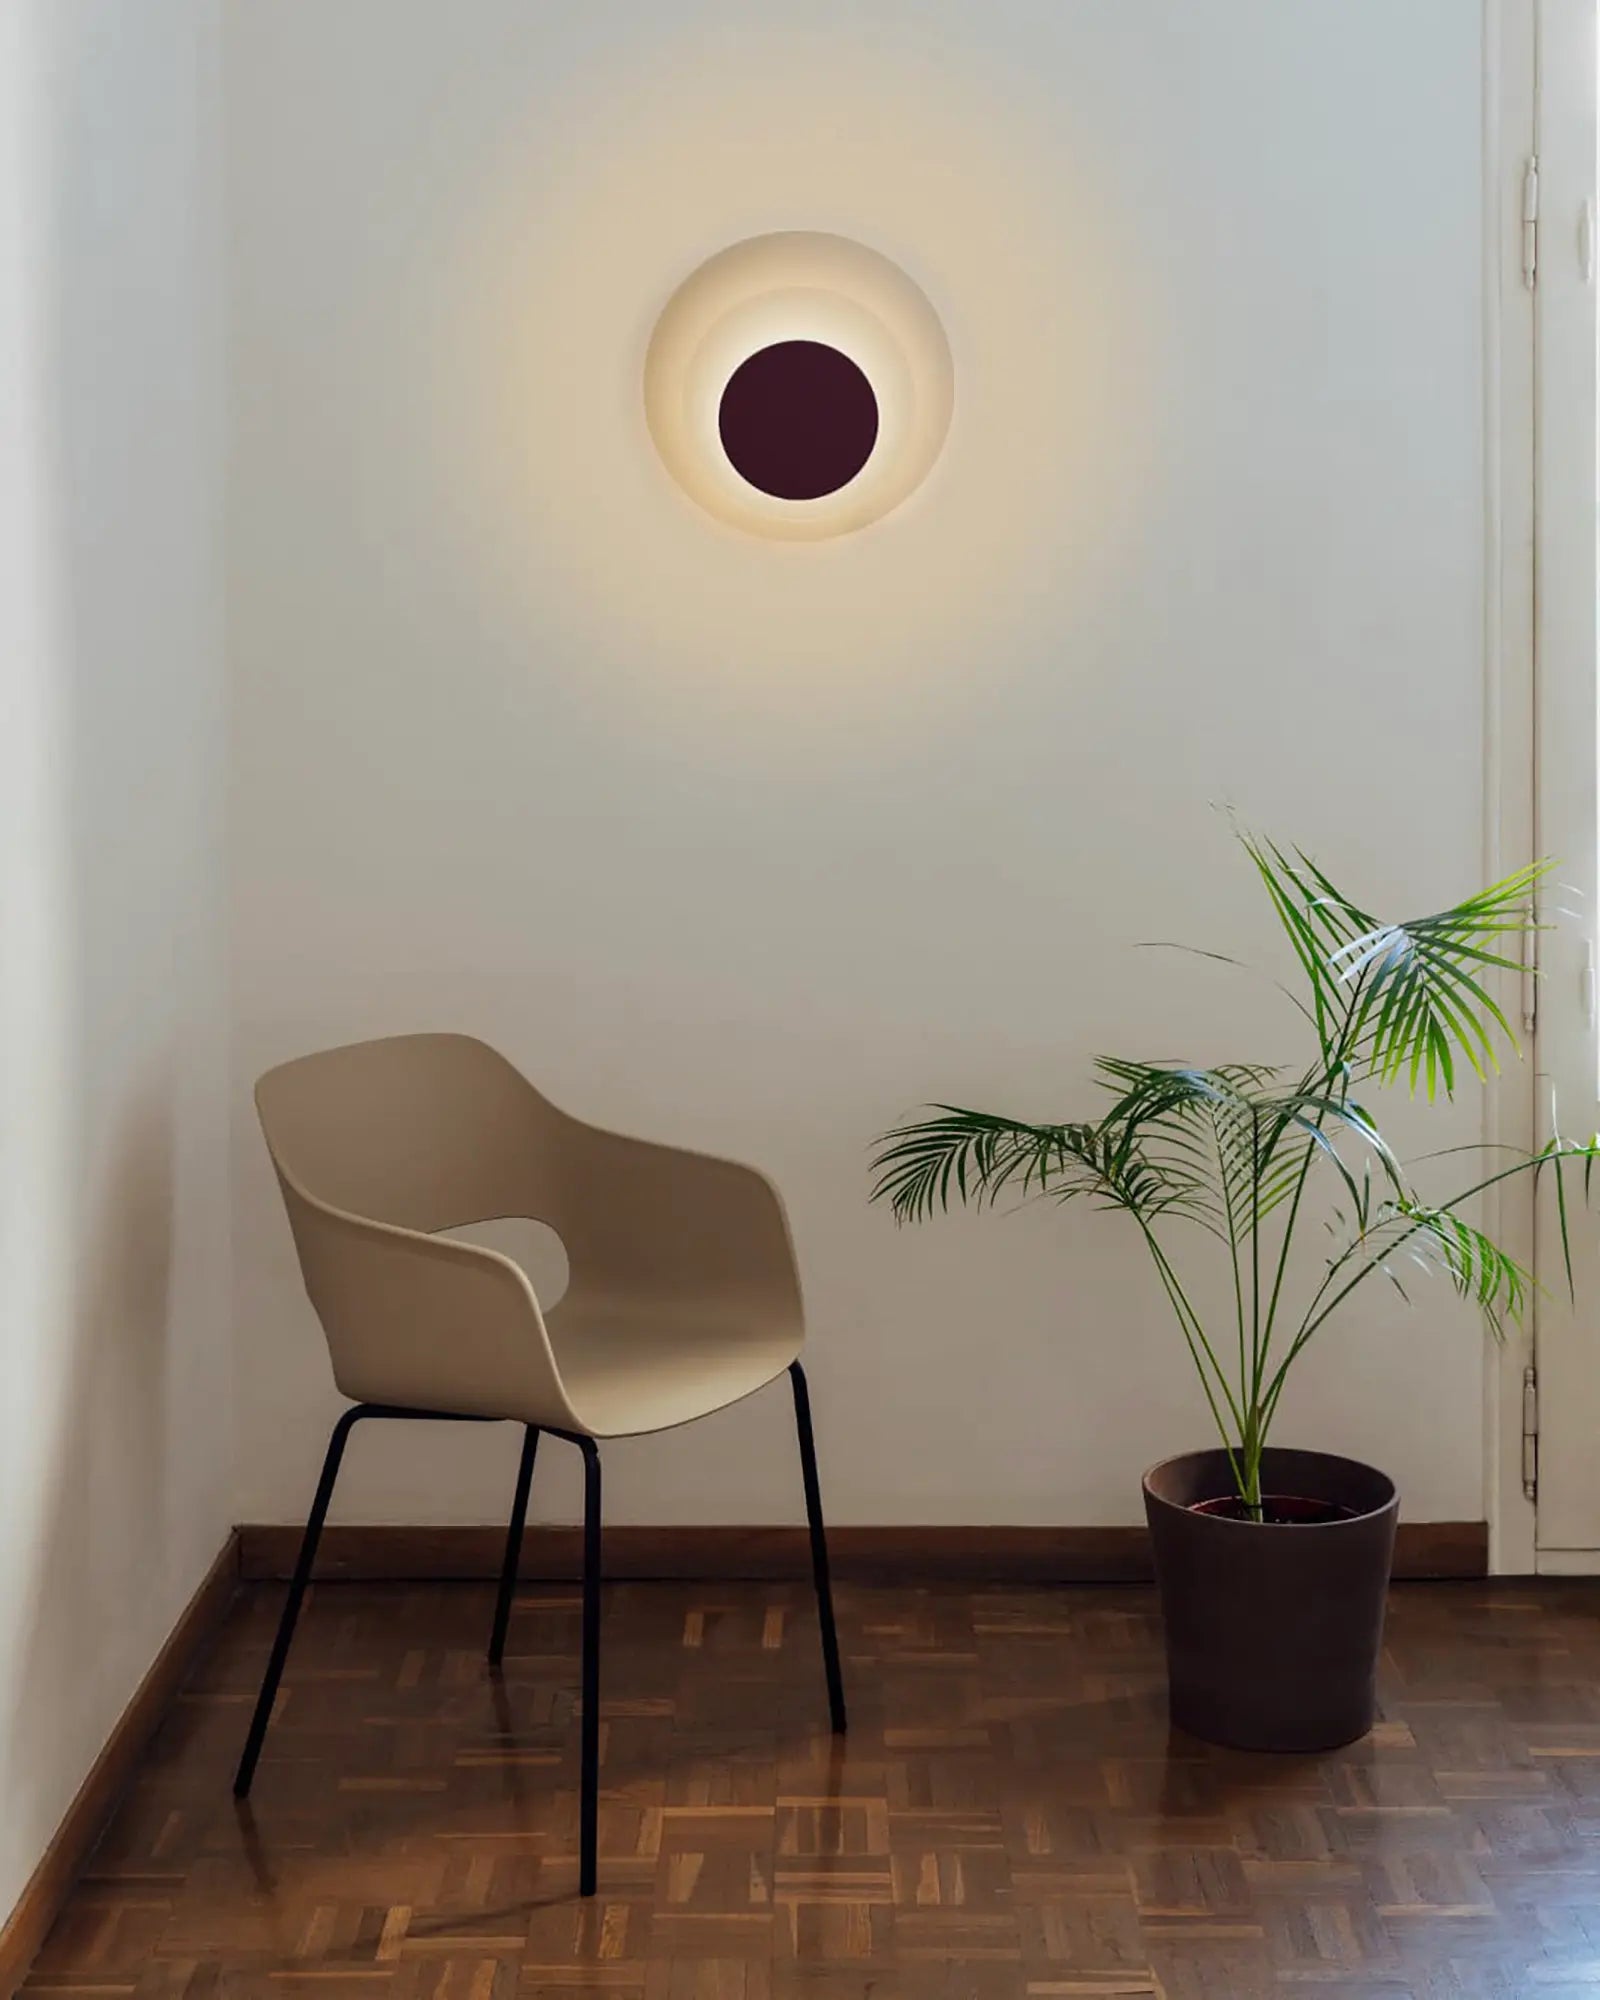 Elisa wall light in a living area above a chair and a plant